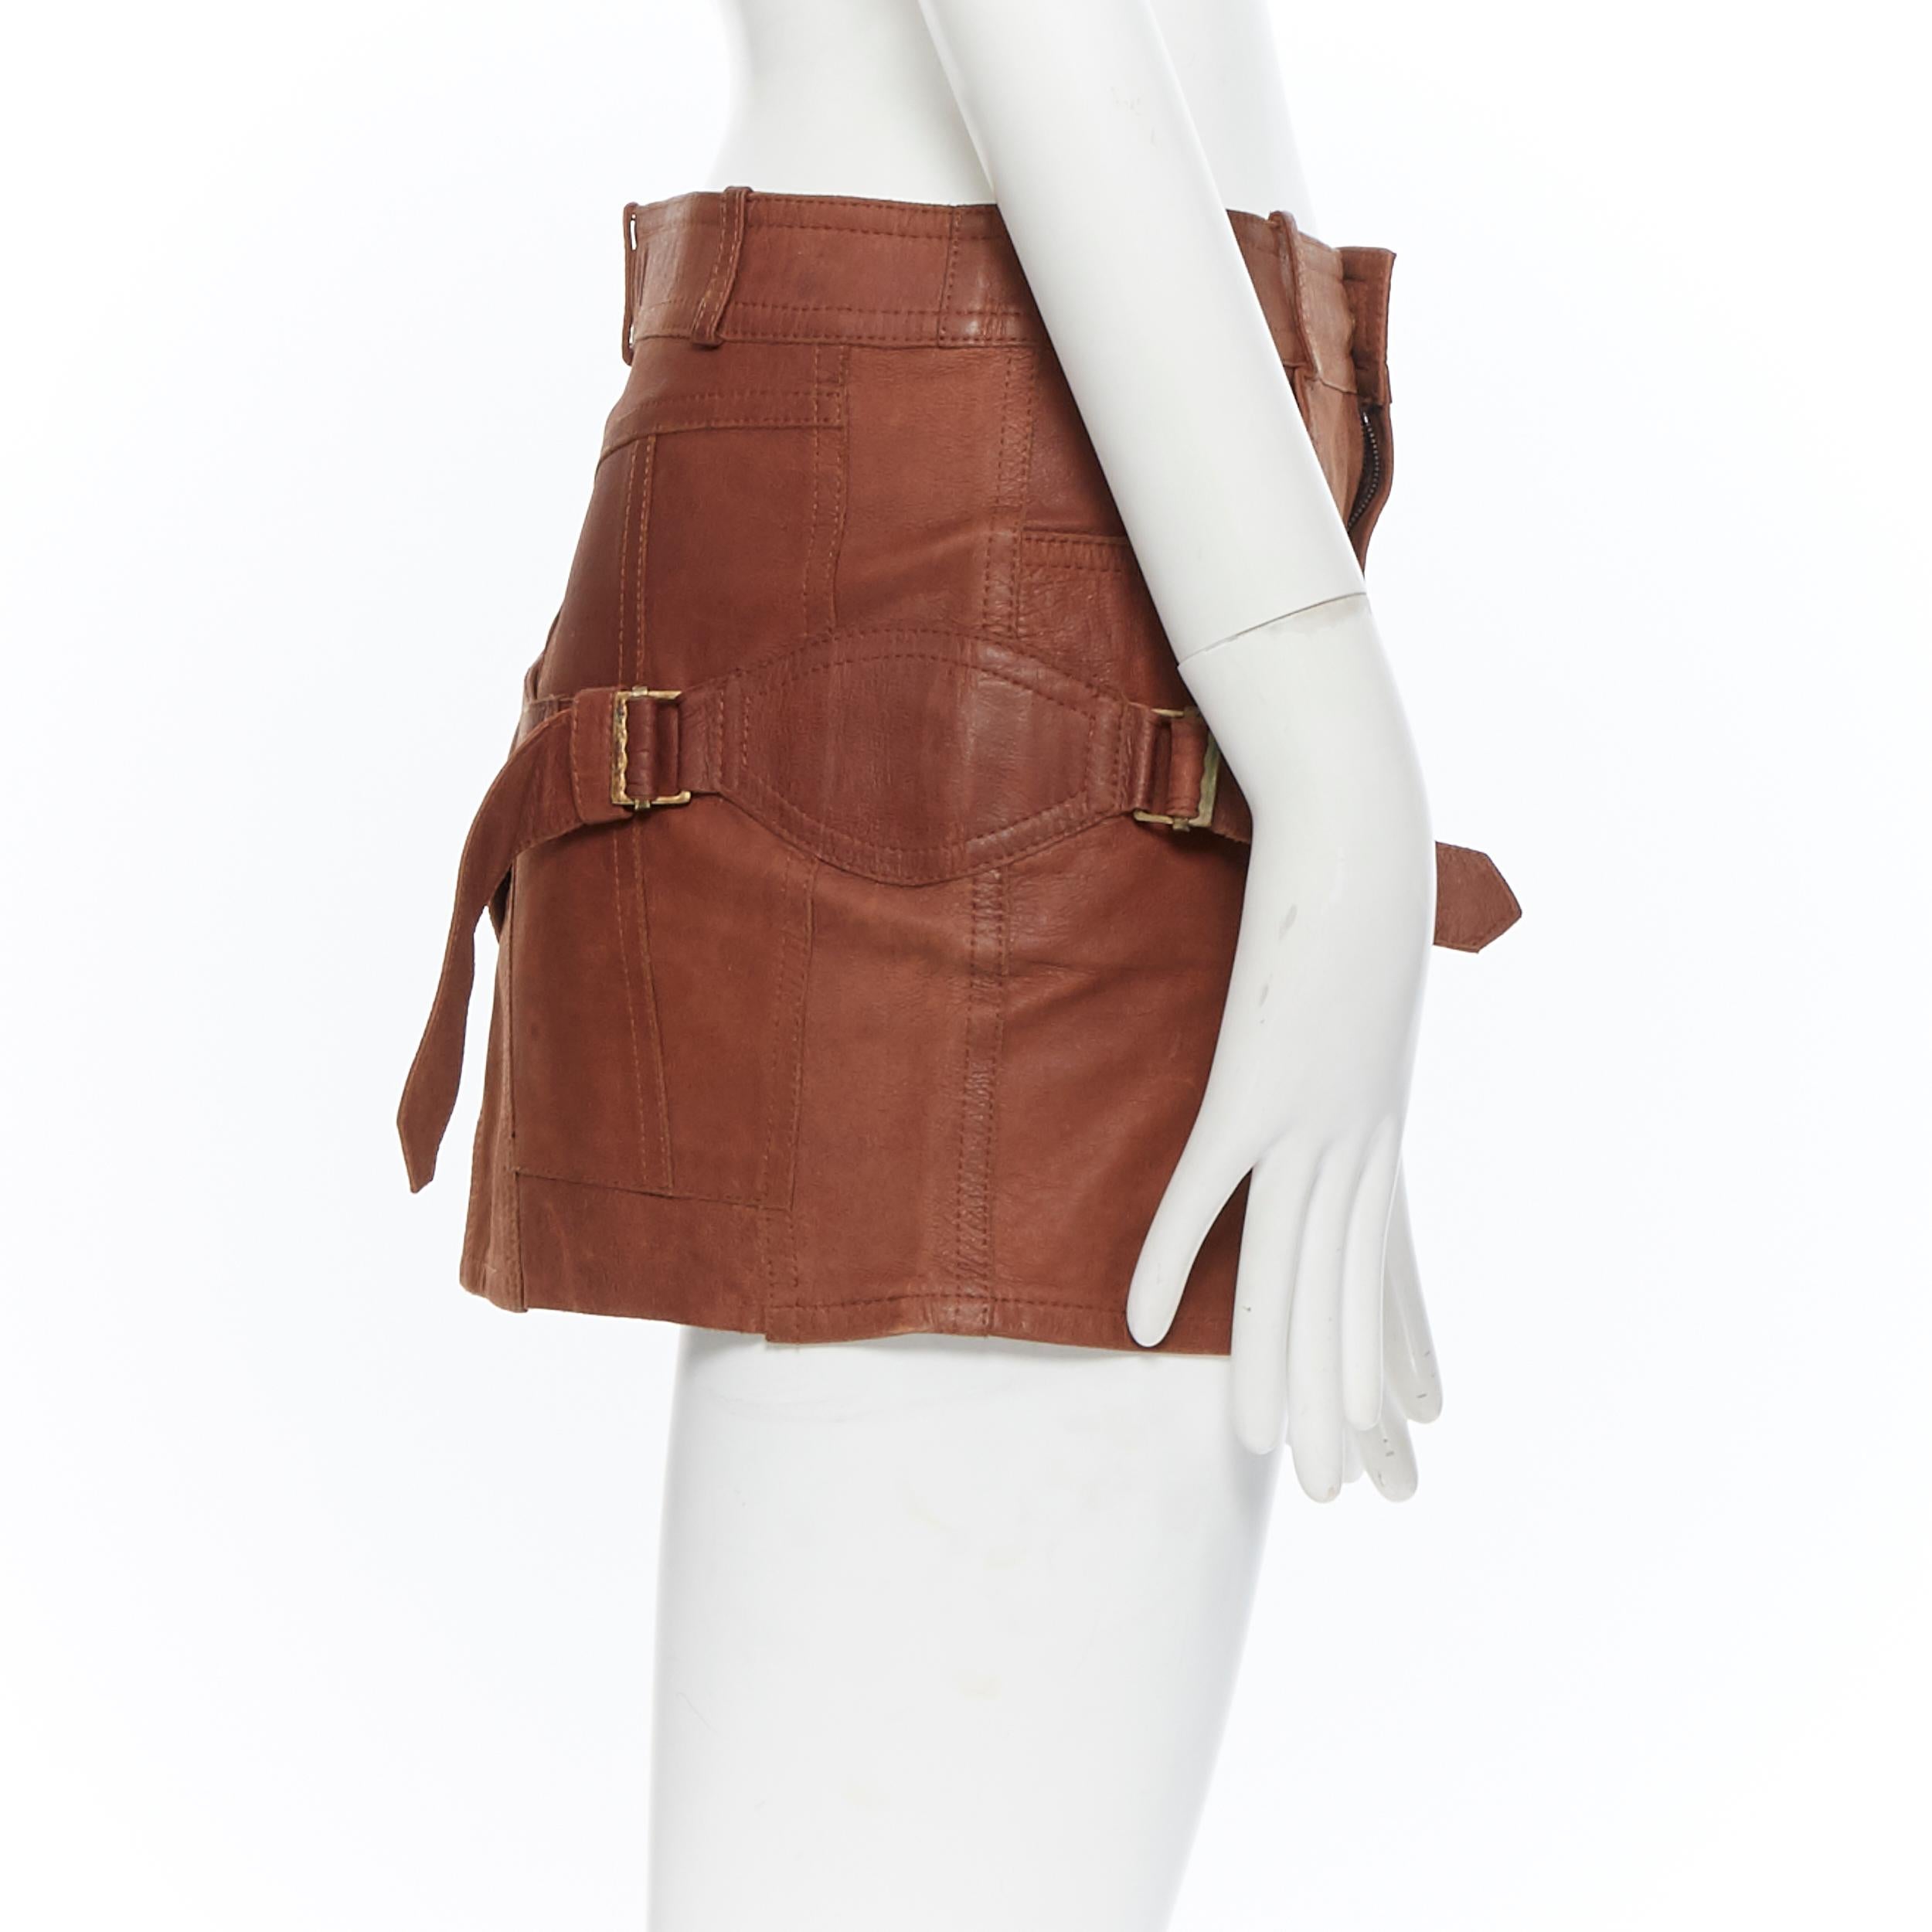 Brown vintage CHRISTIAN DIOR Galliano brown leather strappy buckle mini skirt FR38